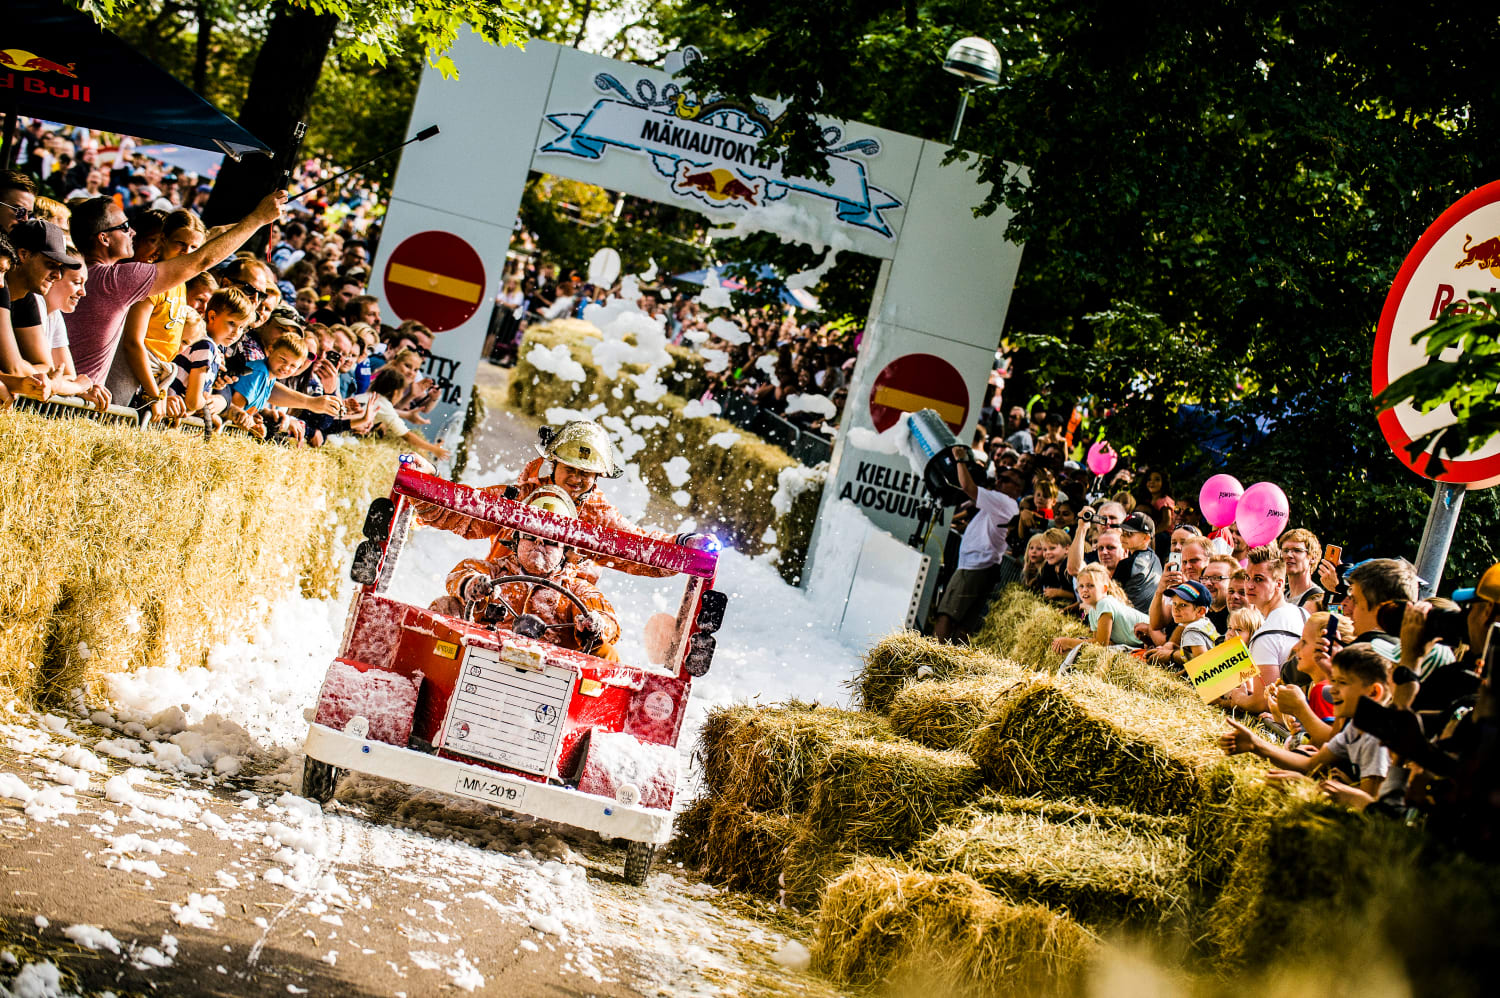 Red Soapbox Race: See races from around the world